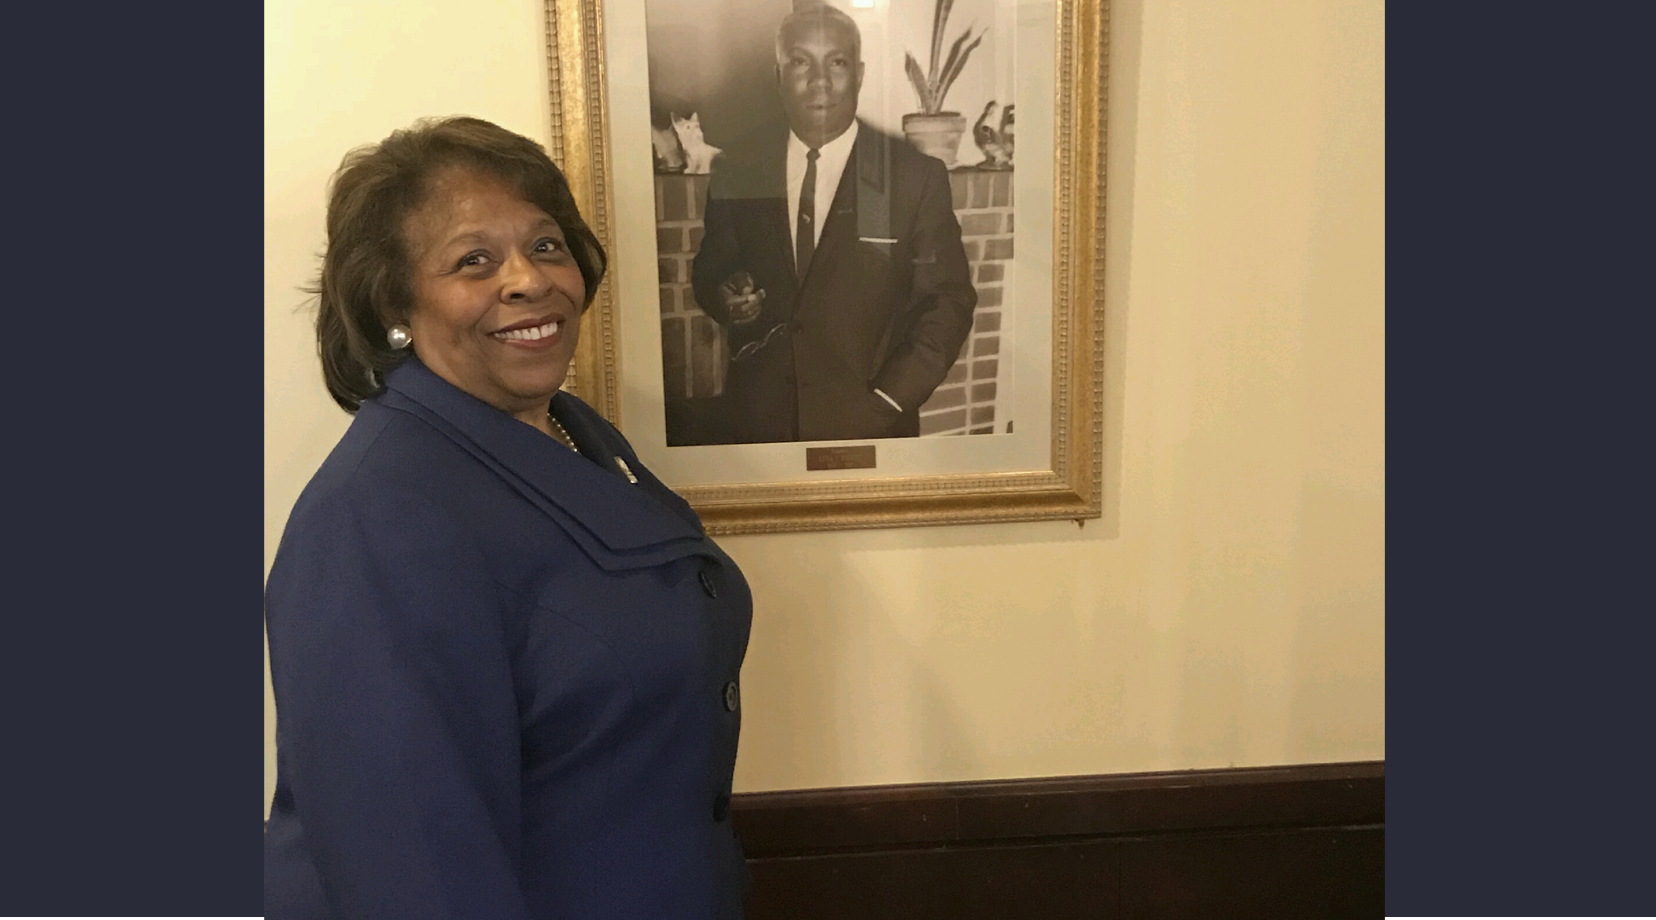 Dr. Wilma Mishoe has made DSU history by becoming the first offspring of a DSU president to serve in the same leadership position at Del State. Dr. Mishoe began her new chapter on Jan. 2 as the interim DSU president. 